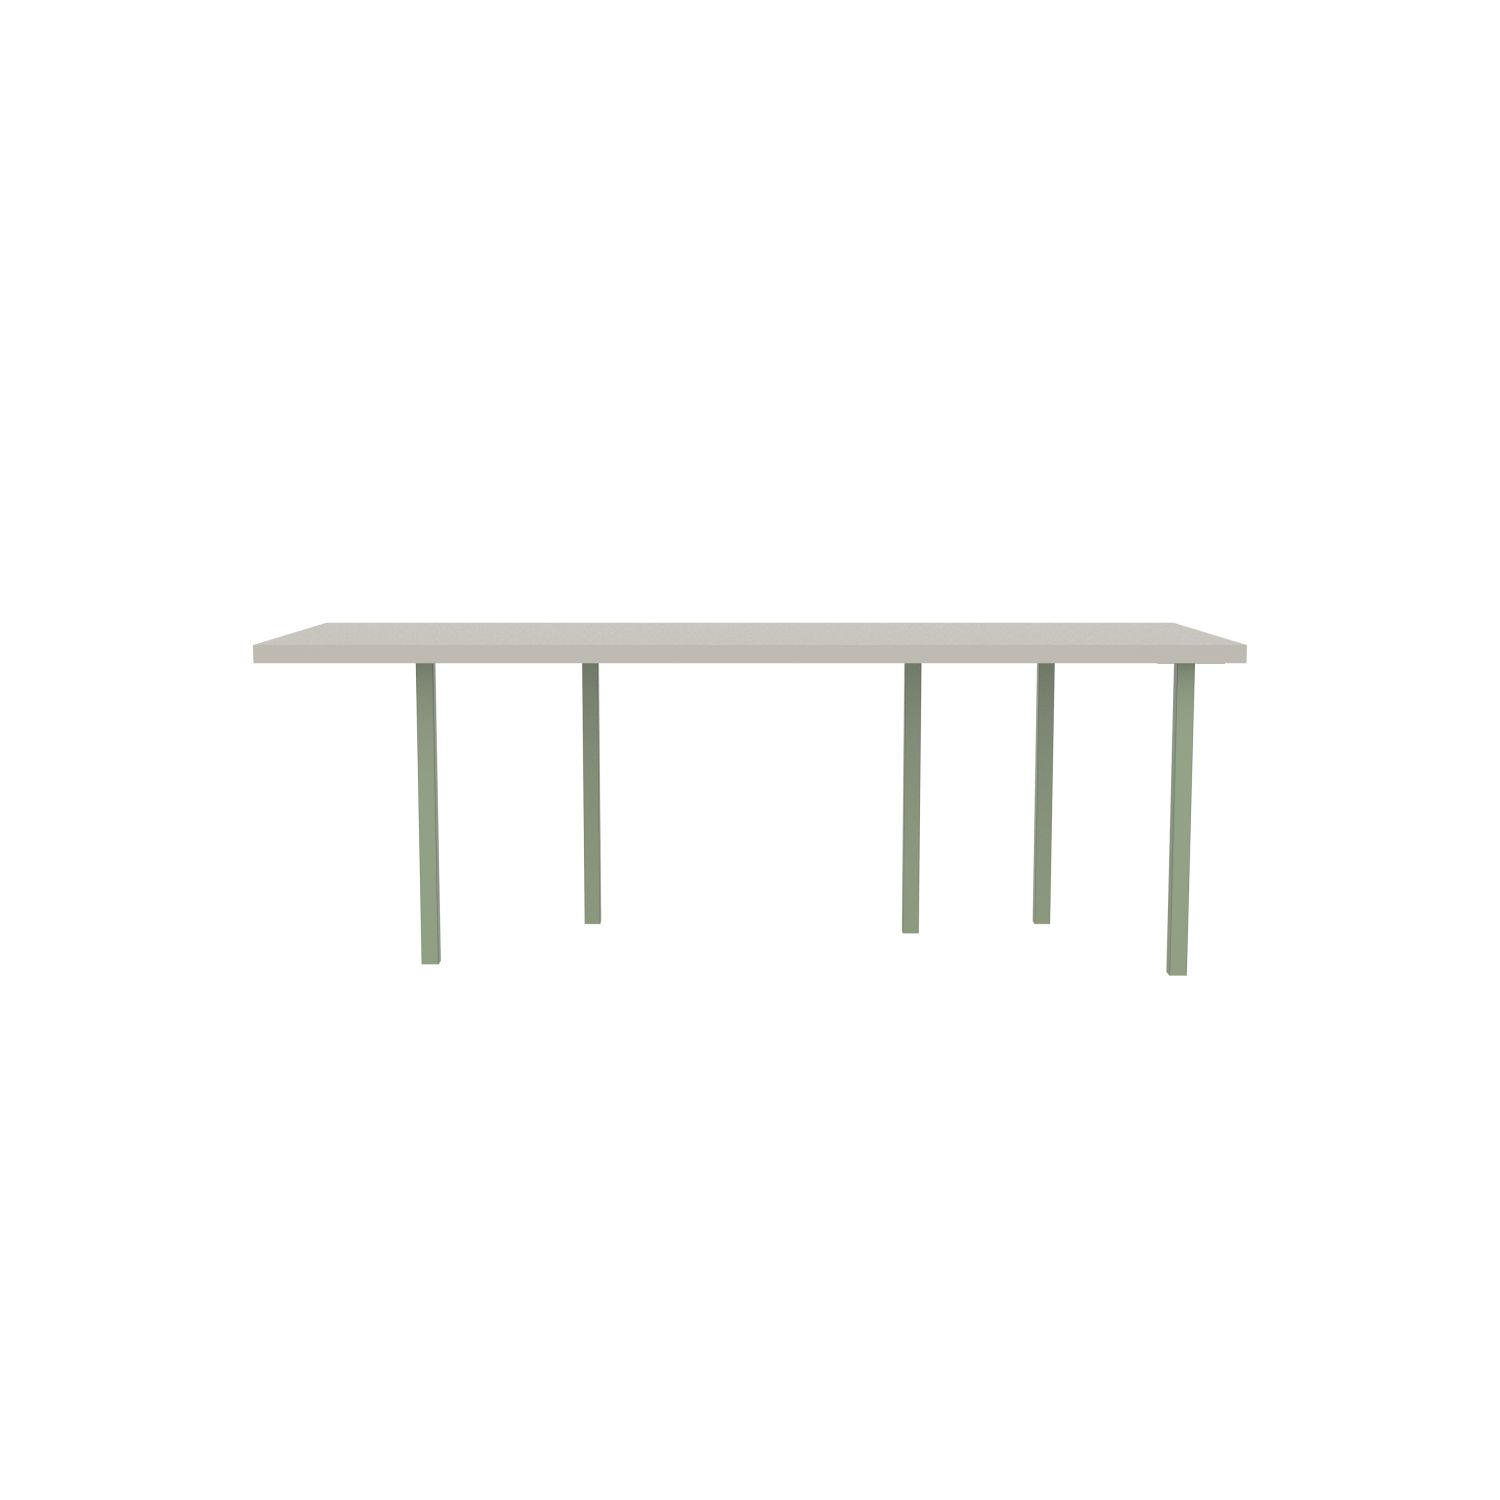 lensvelt bbrand table five fixed heigt 80x218 hpl white 50 mm price level 1 green ral6021